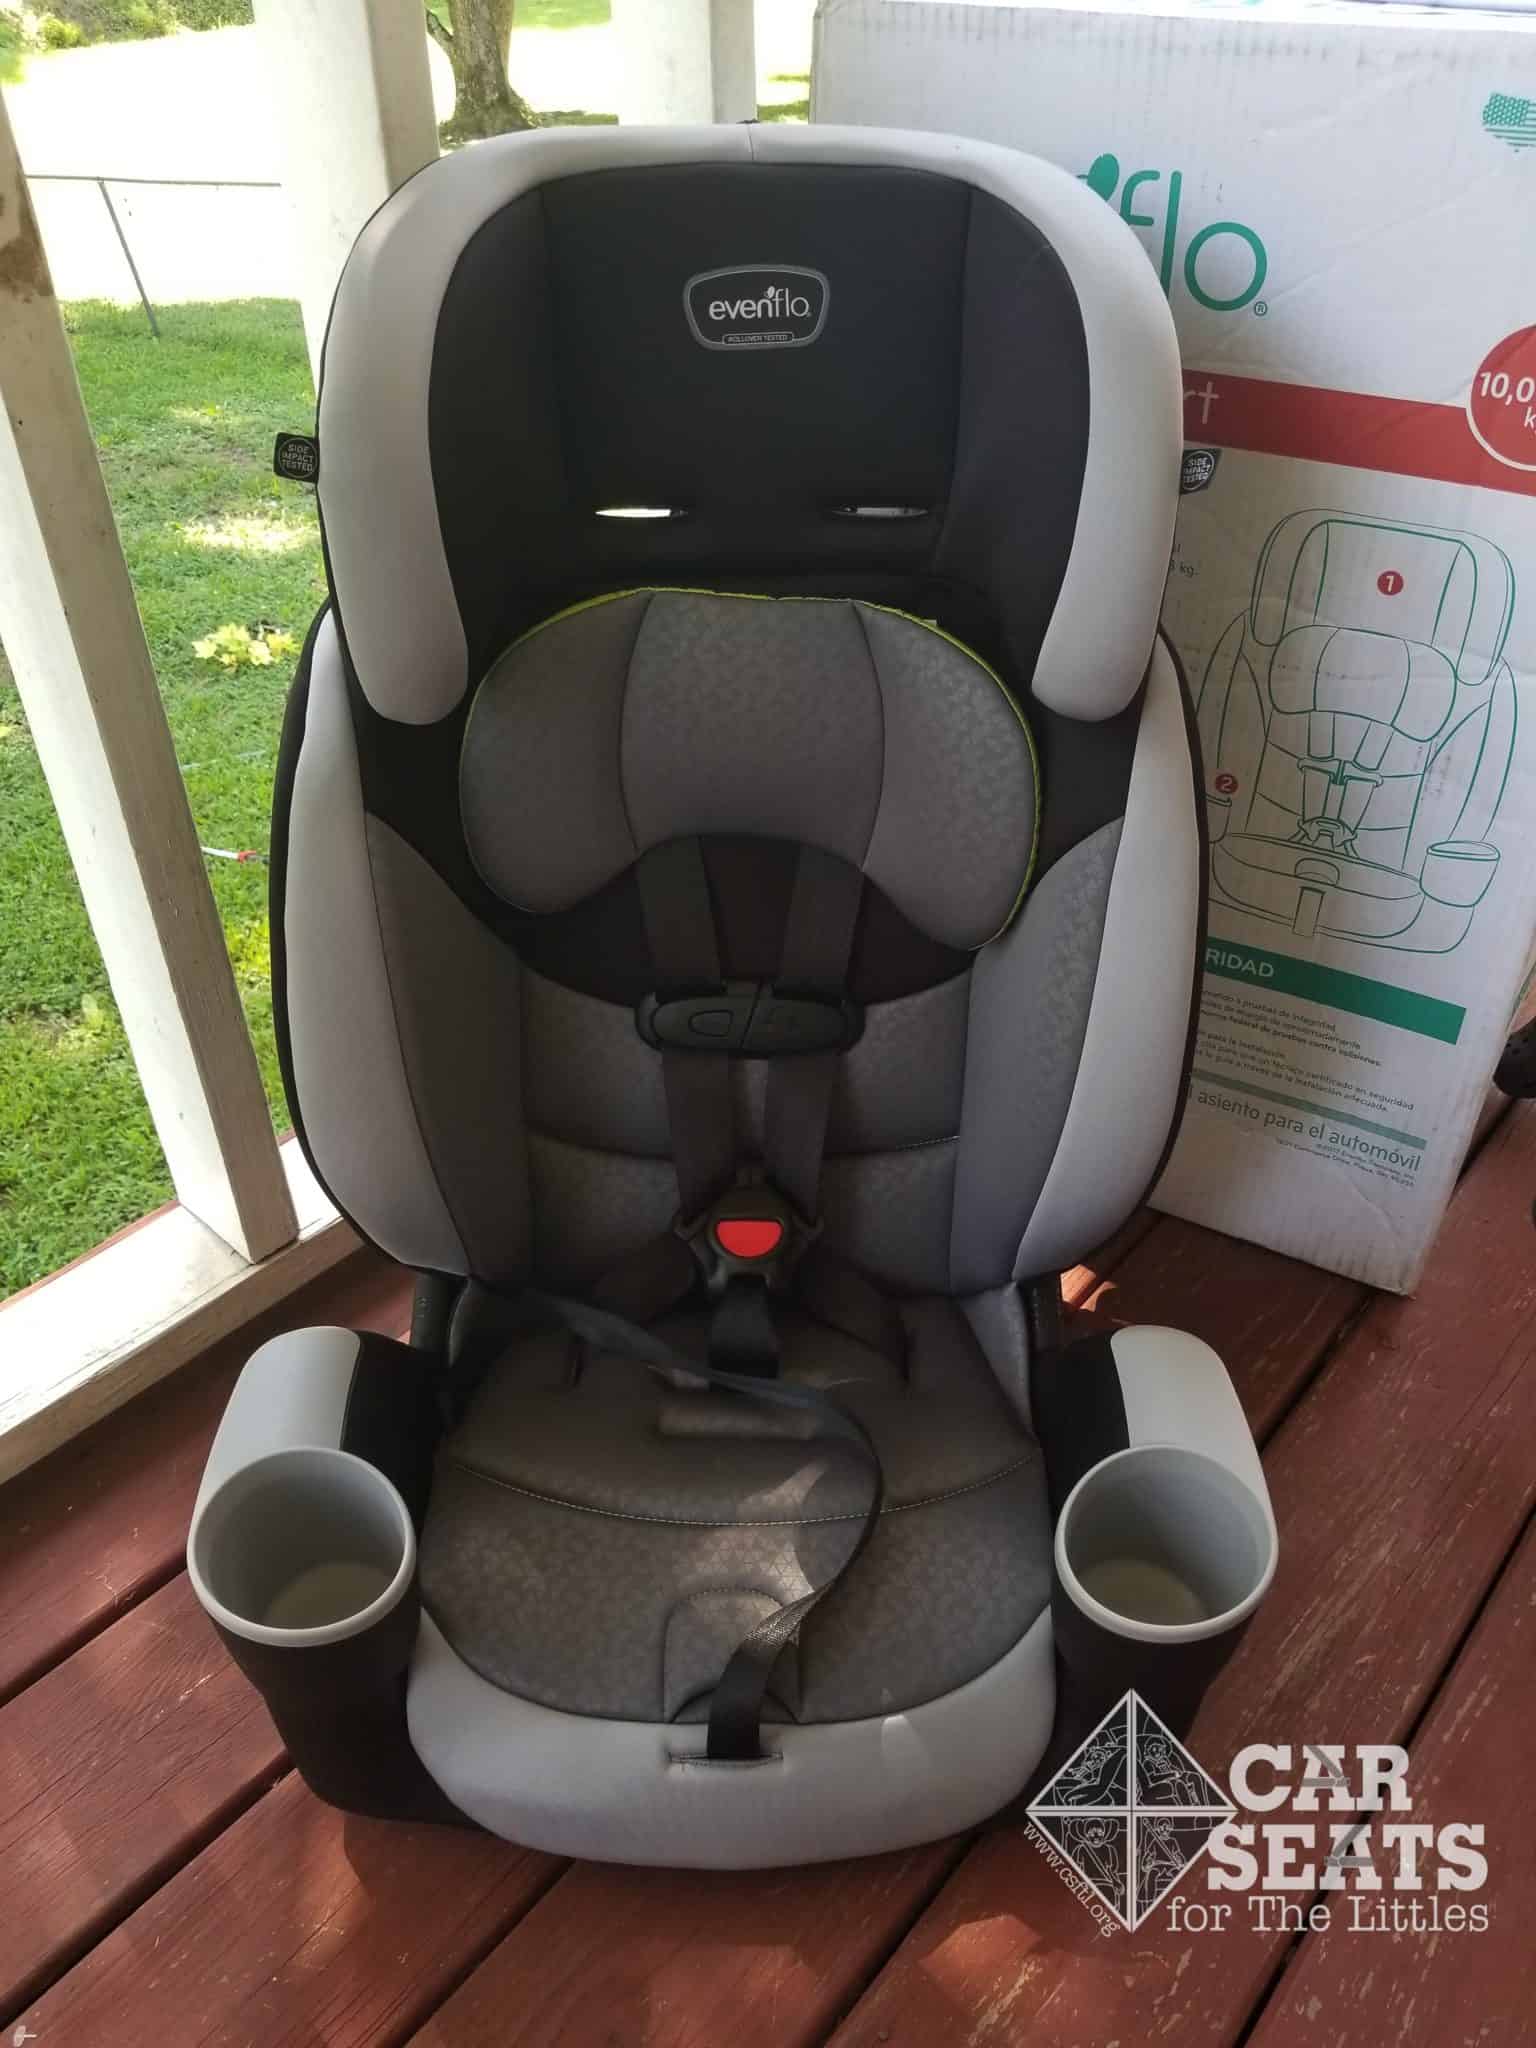 Evenflo Maestro Sport Review - Car Seats For The Littles